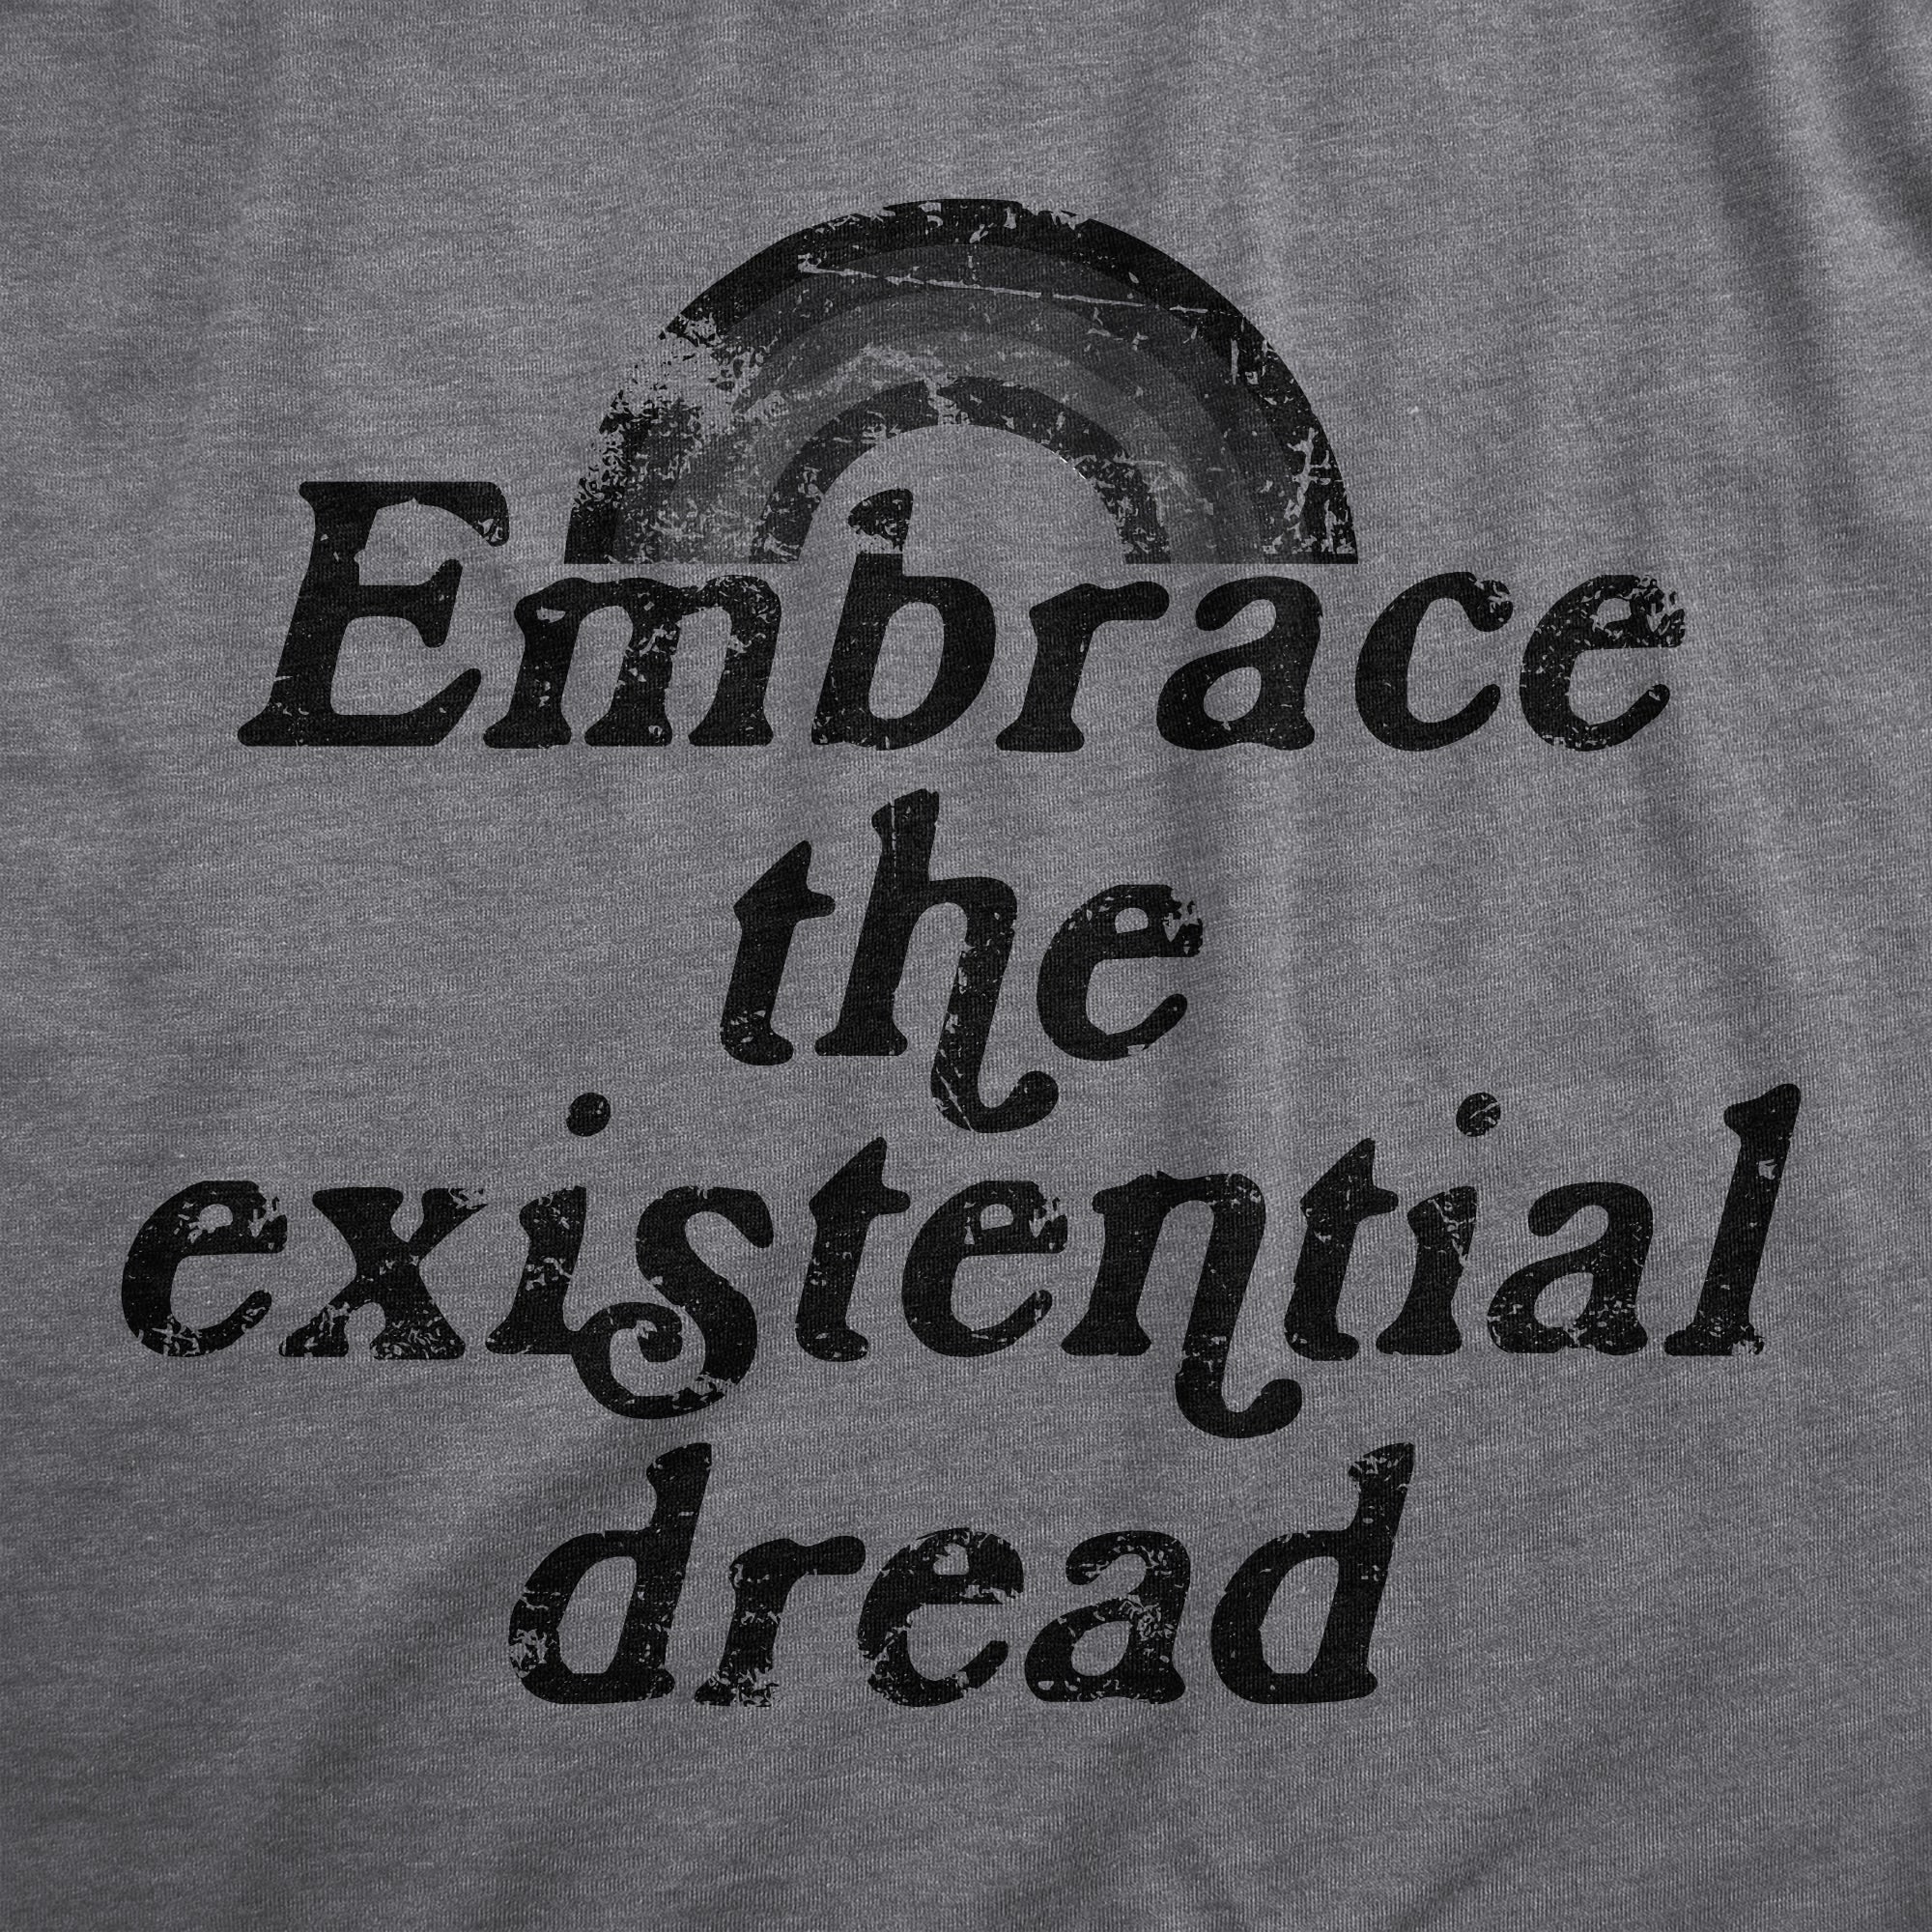 Funny Dark Heather Grey - DREAD Embrace The Existential Dread Mens T Shirt Nerdy Sarcastic Tee